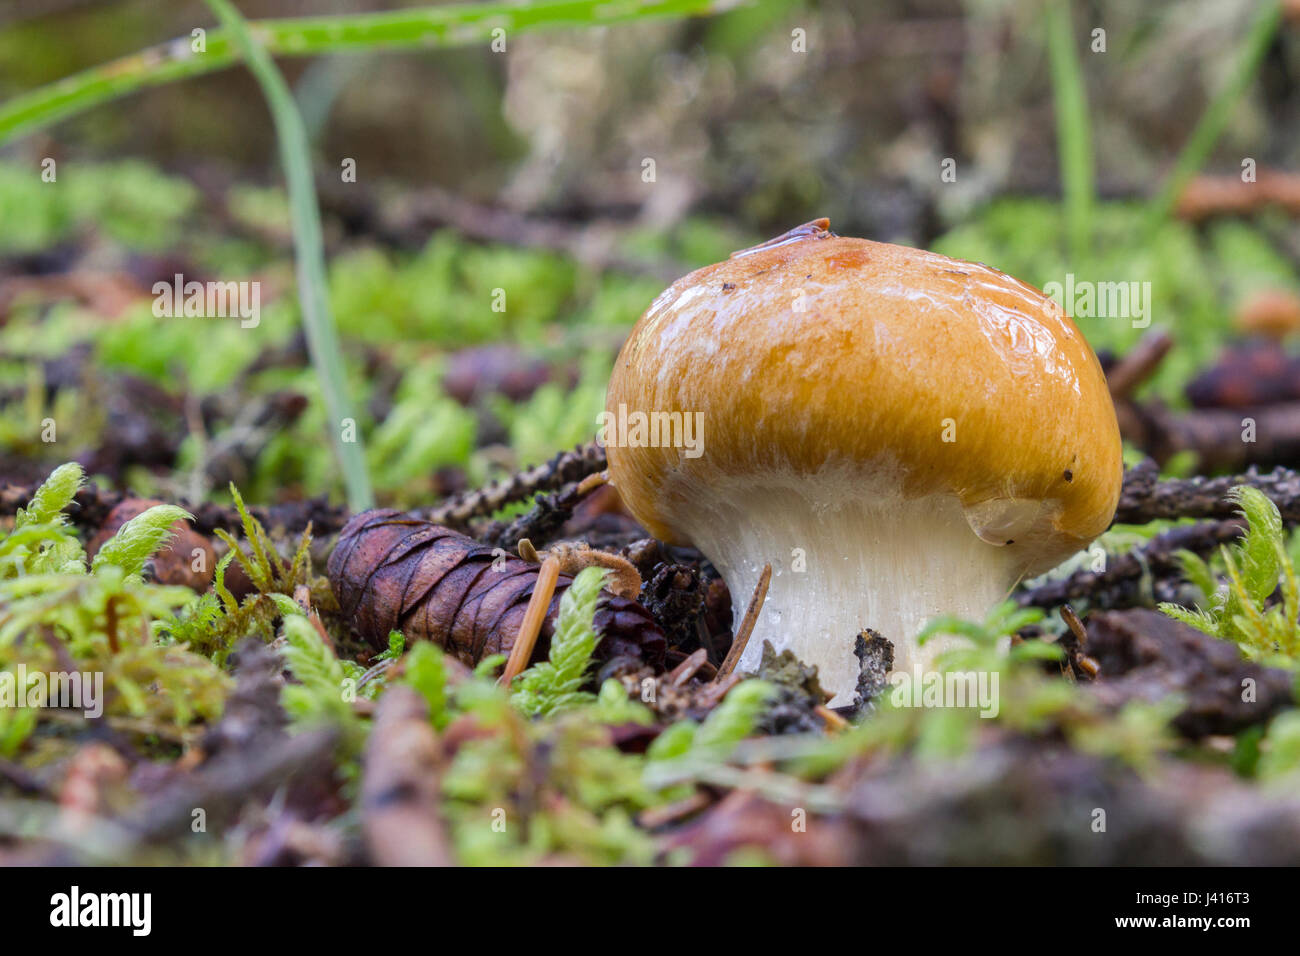 An immature gilled mushroom with its partial veil, in Alberta foothills. Stock Photo